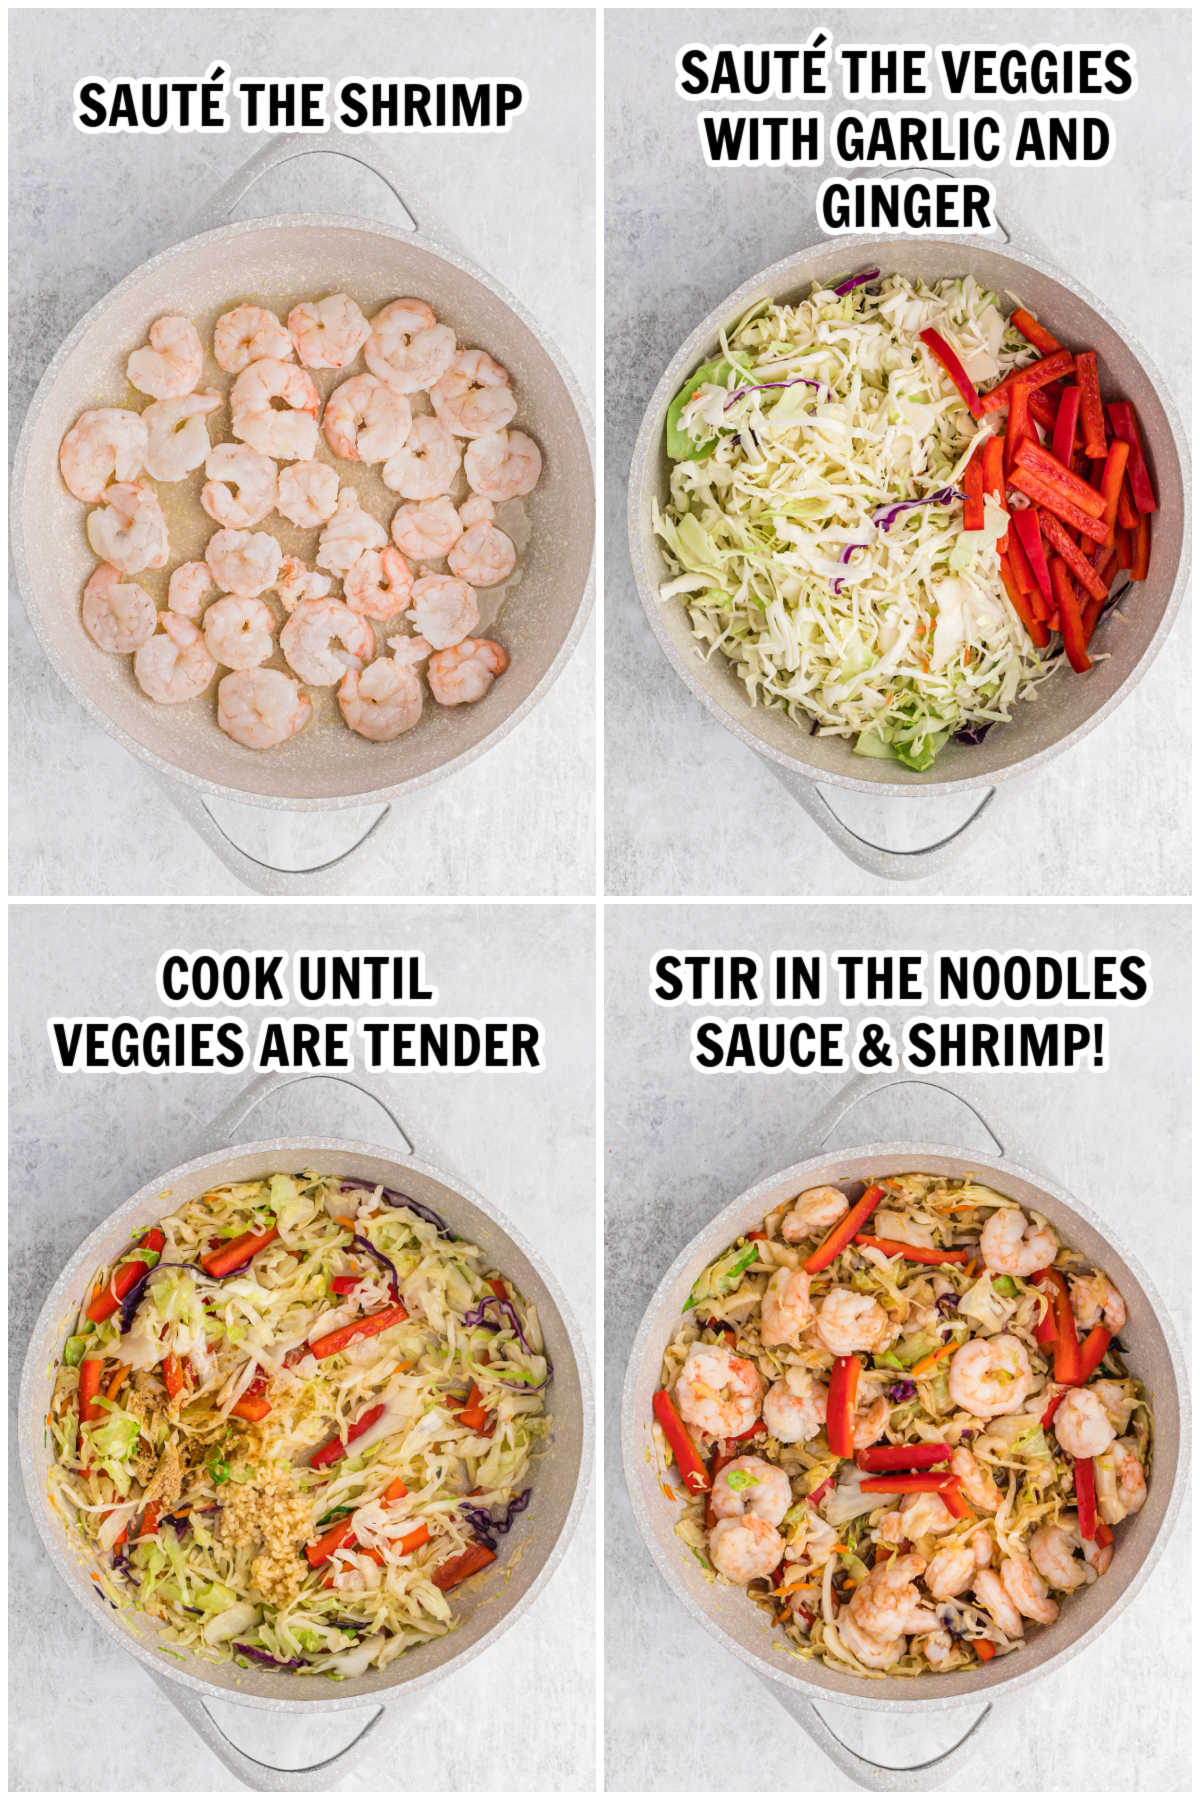 The process of making shrimp lo mein